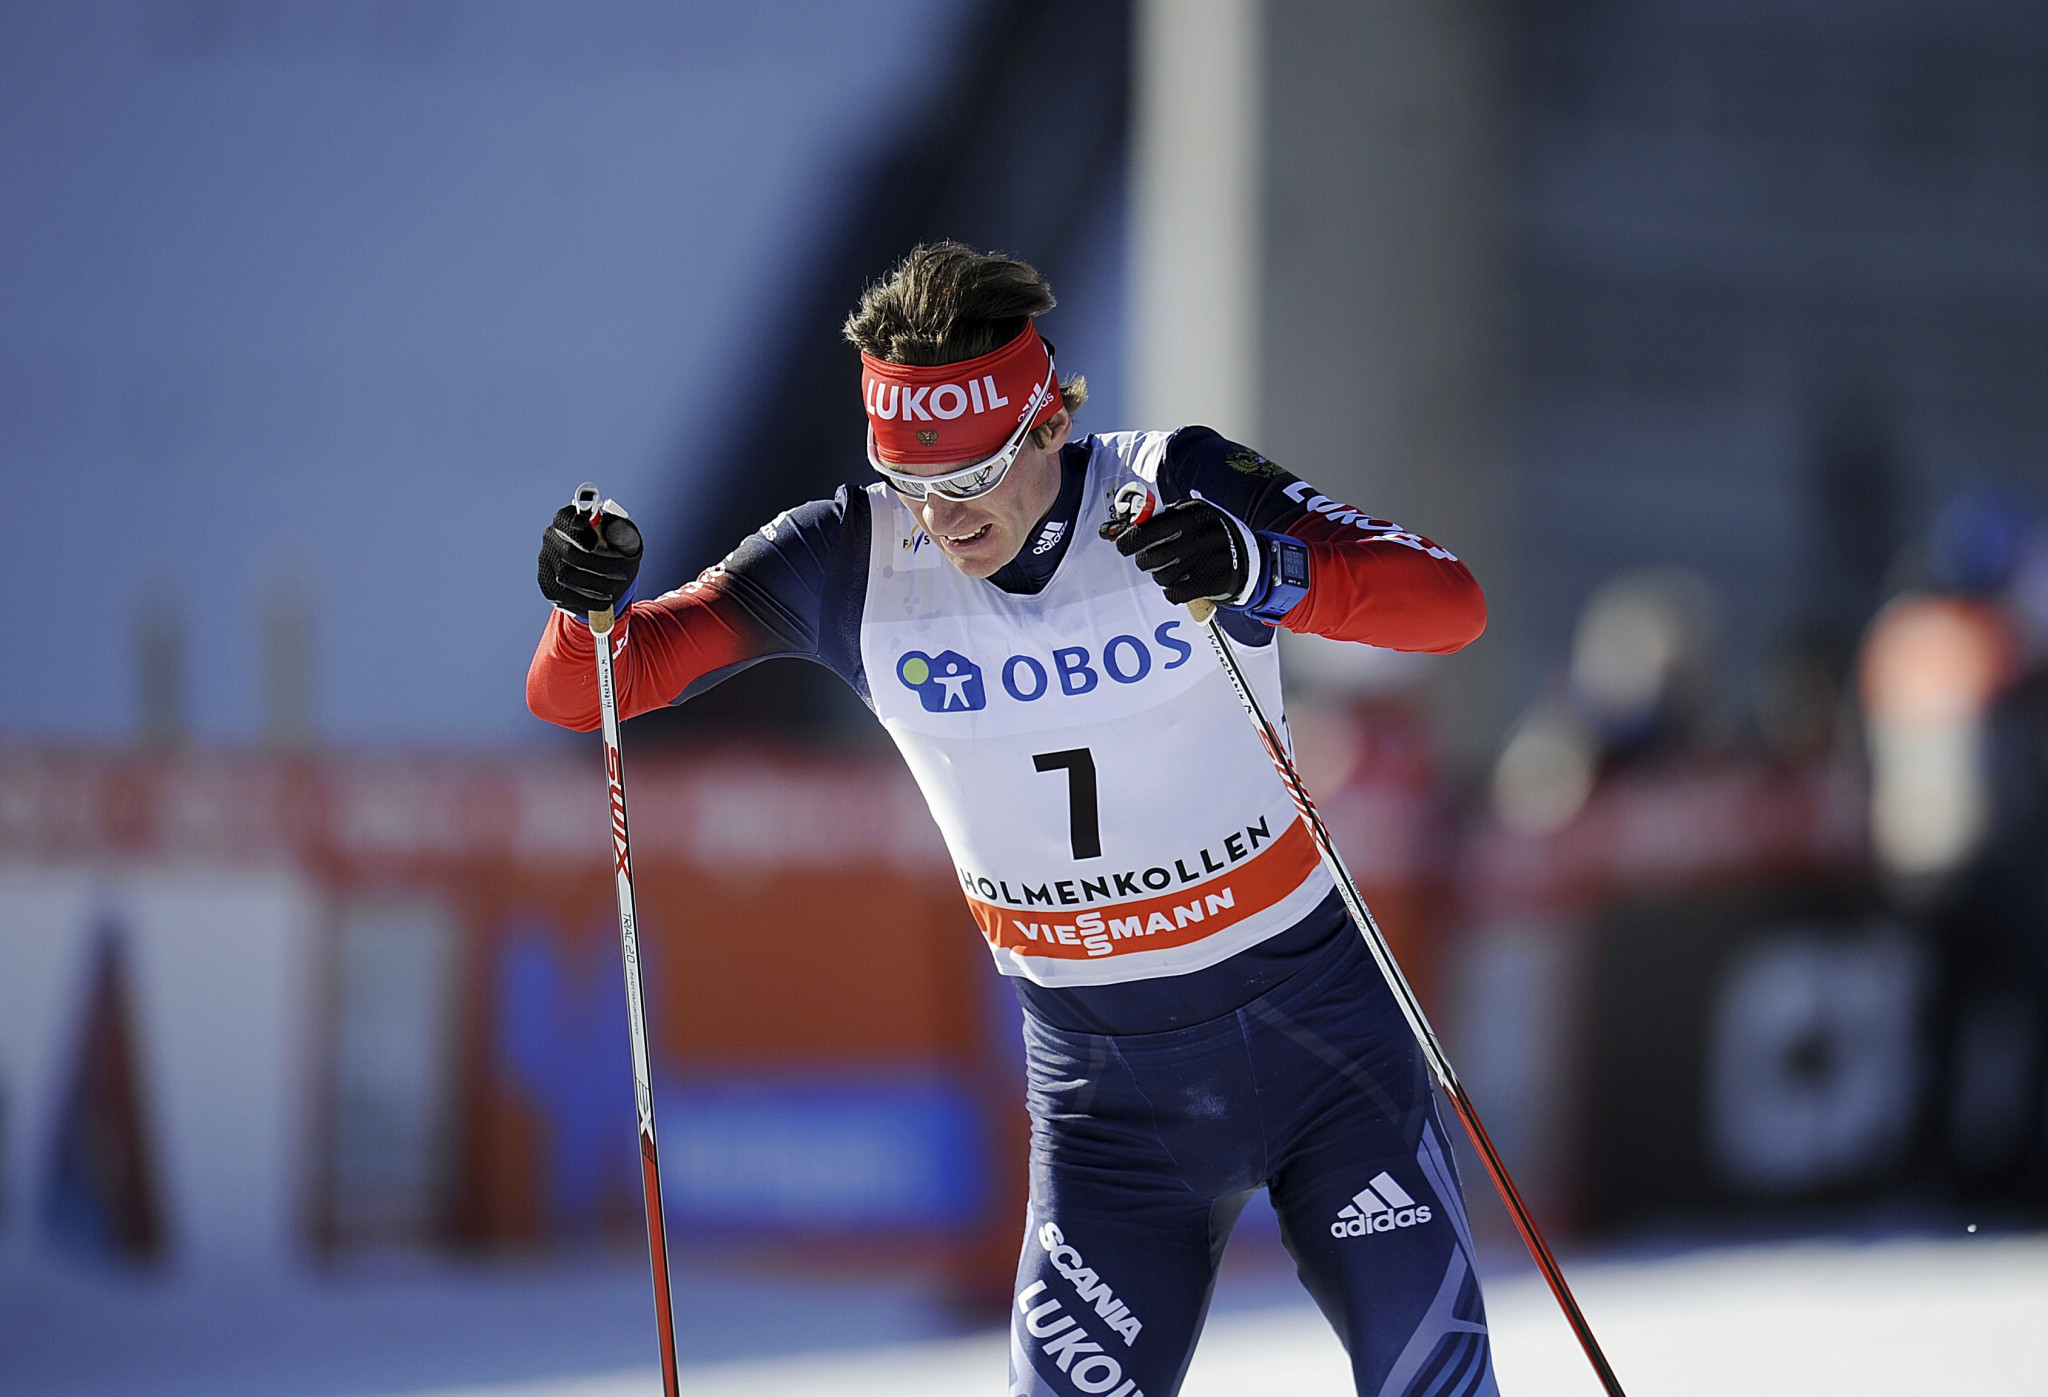 Maxim Vylegzhanin is one of the Russian Cross-Country skiers to have a lifetime ban imposed on him by the IOC ©Getty Images